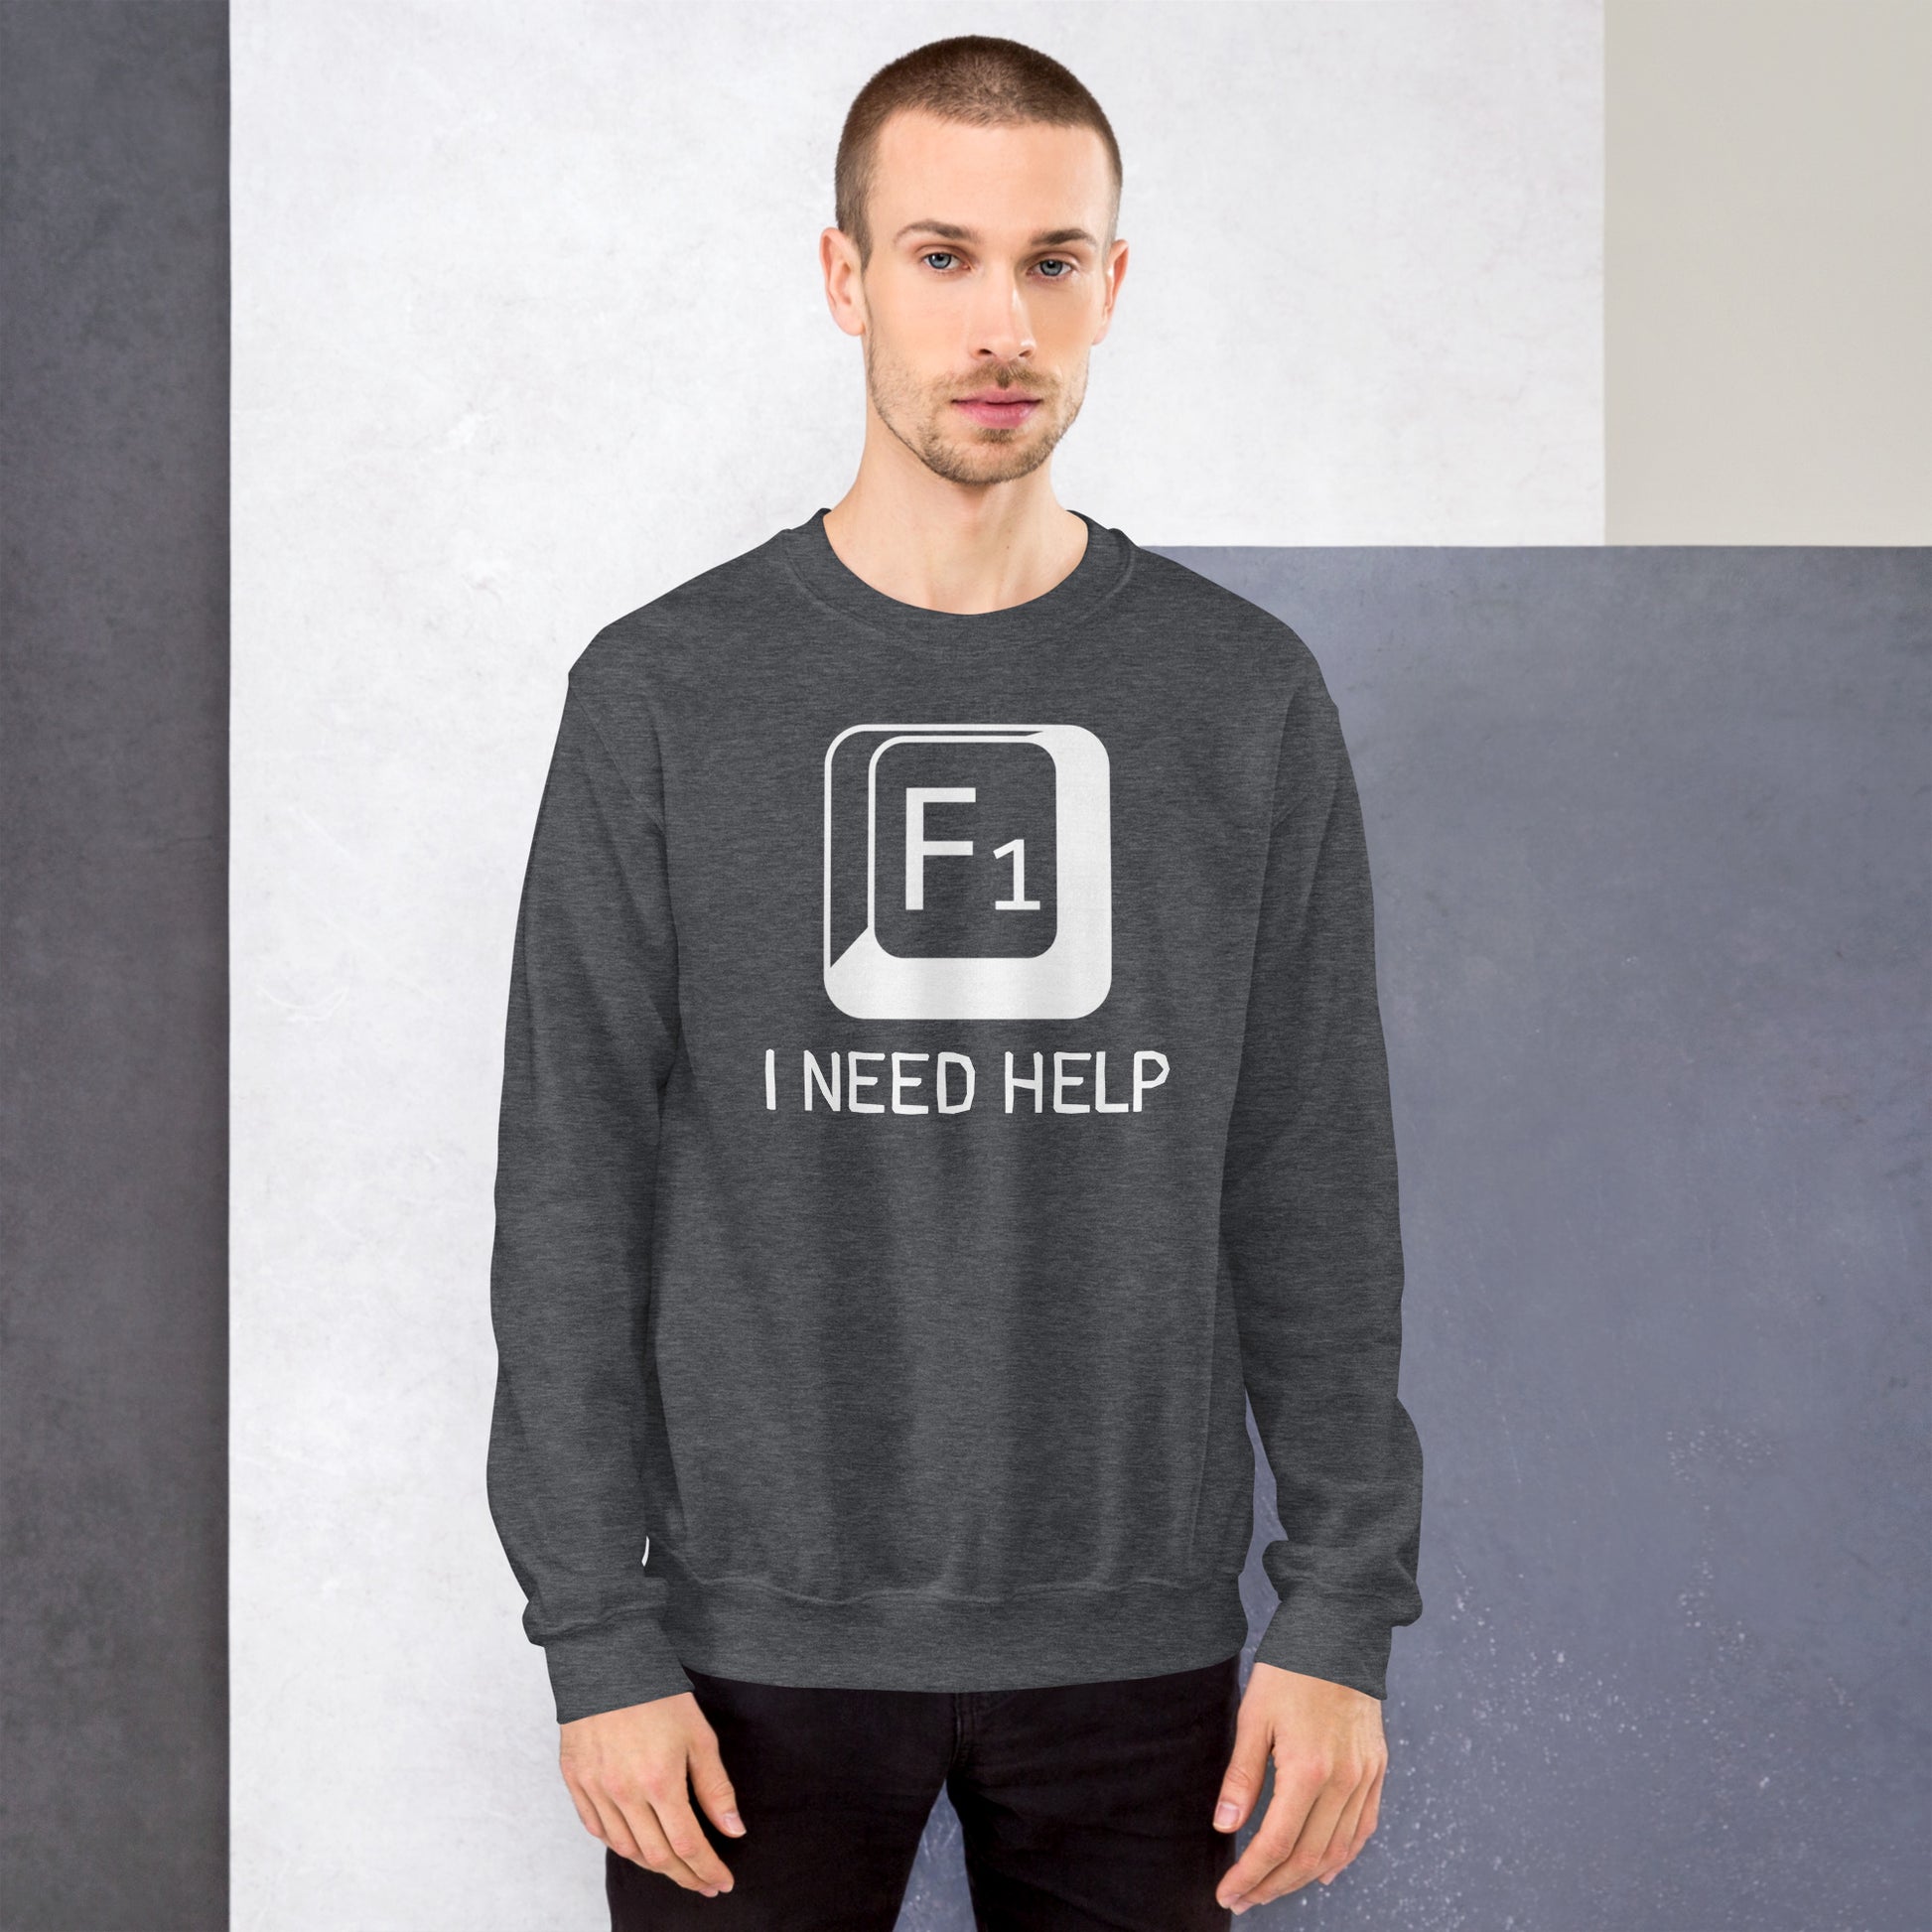 Men with dark heather sweatshirt and a picture of F1 key with text "I need help"